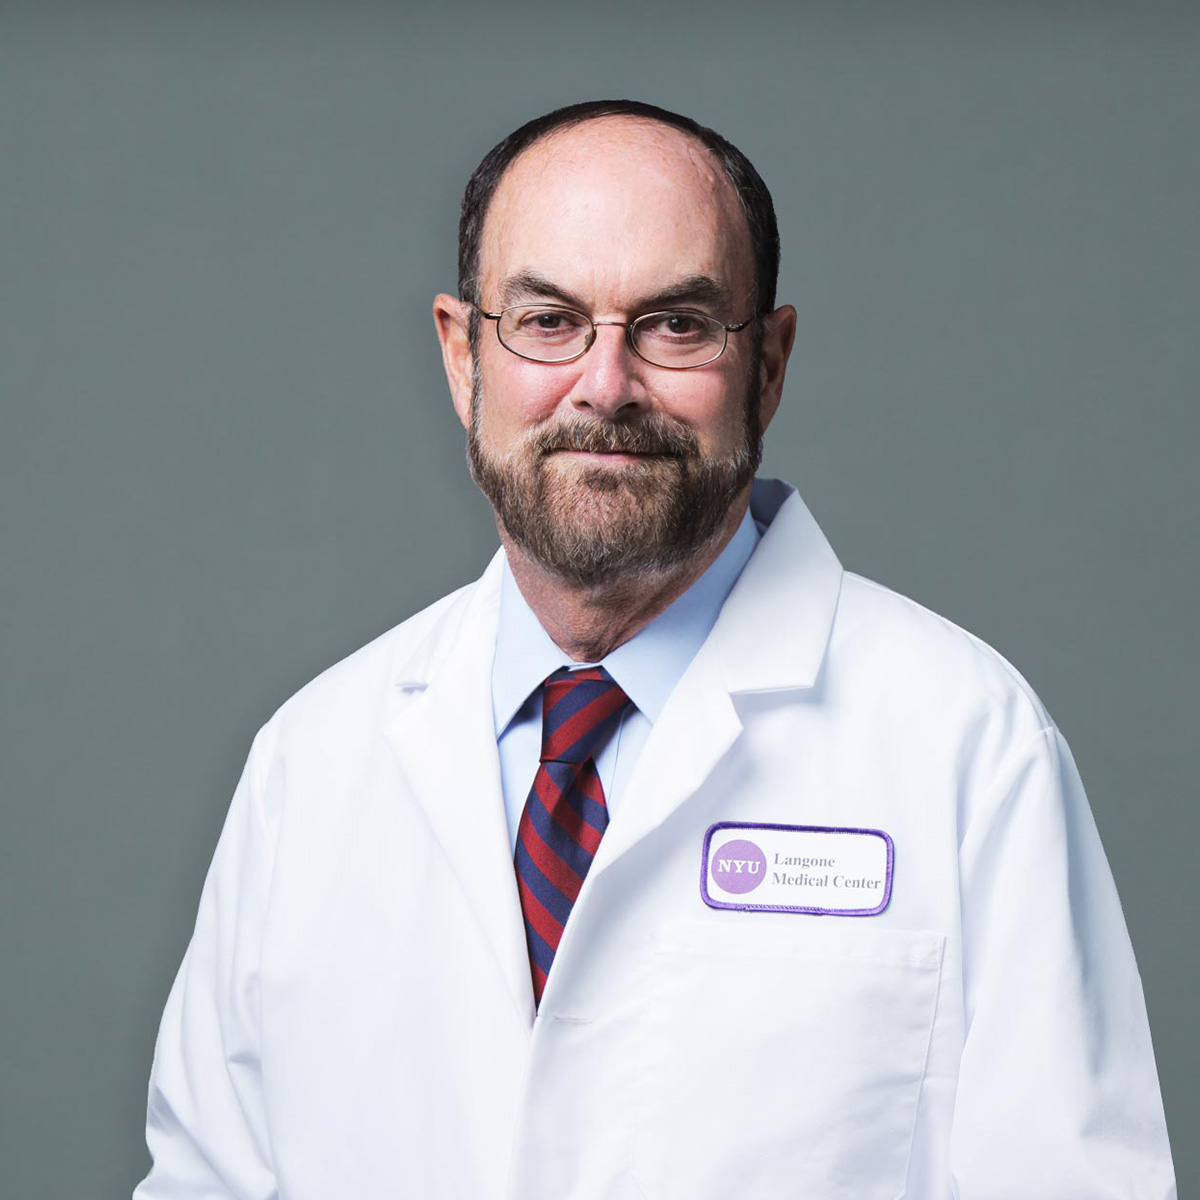 Frederick Feit,MD. Interventional Cardiology, Cardiology